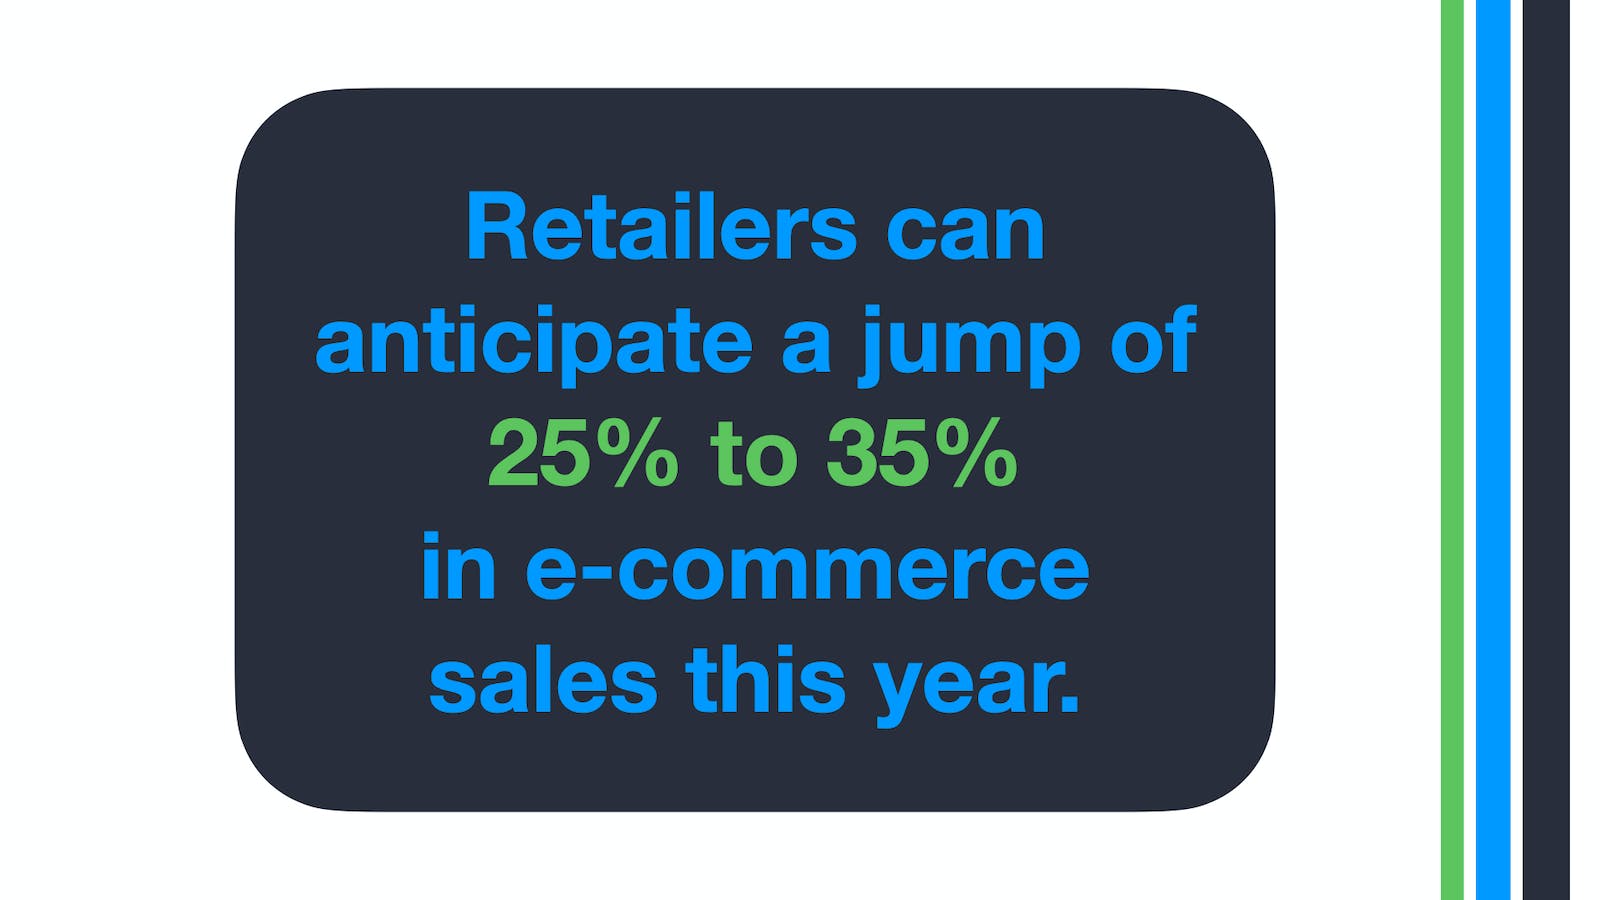 retailers can anticipate a jump of 25% to 35%